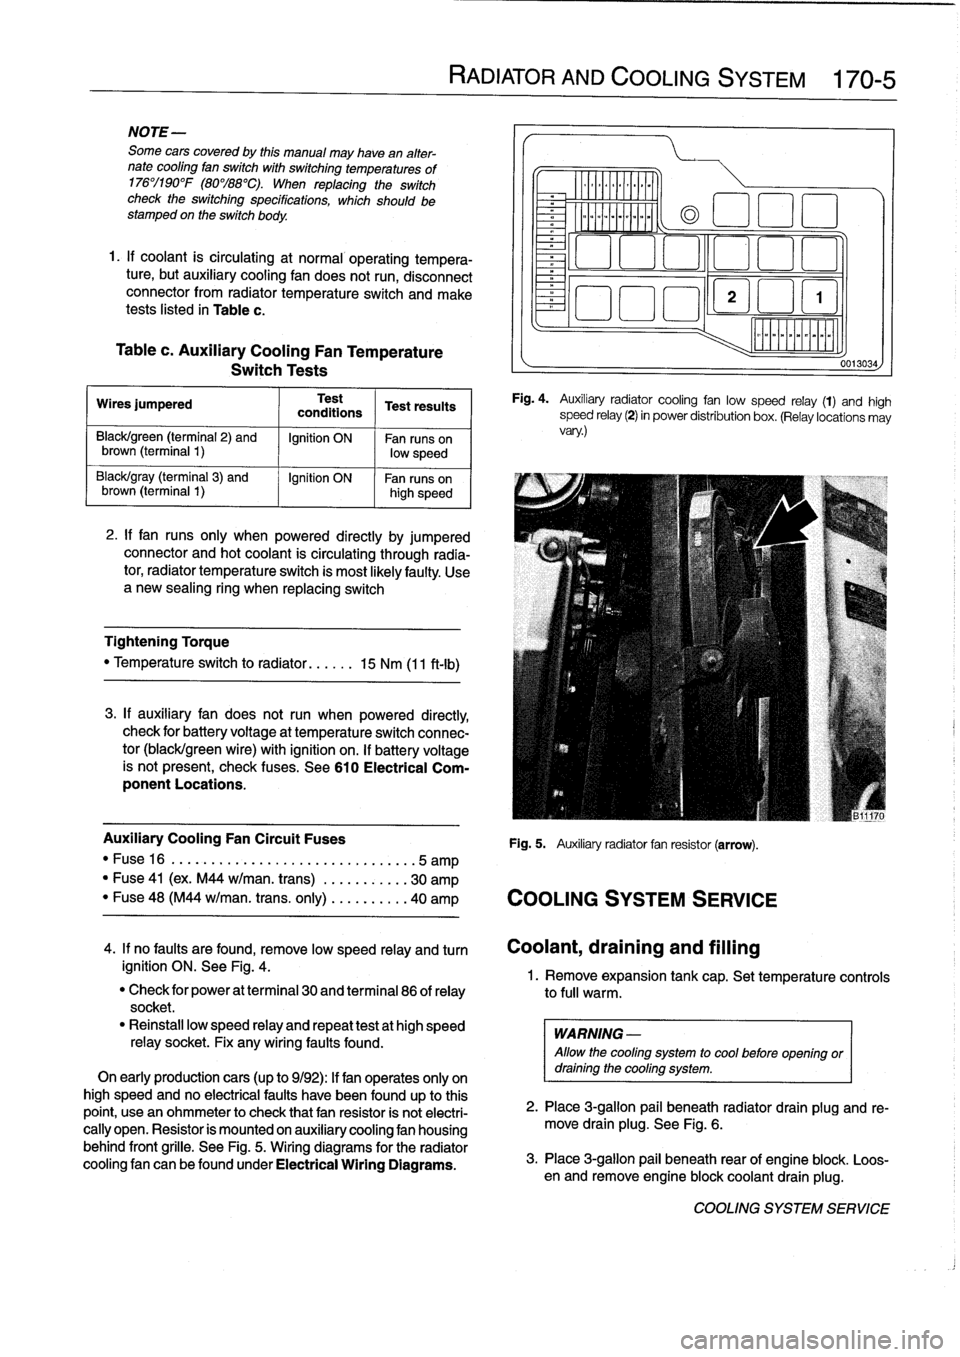 BMW 318i 1994 E36 Workshop Manual 
NOTE-

Some
cars
covered
by
this
manual
may
have
an
alter-
nate
cooling
fan
switchwith
switching
temperatures
of
176%190W
(80%88°C)
.
When
replacing
the
switch
check
theswitching
specifications,
whi